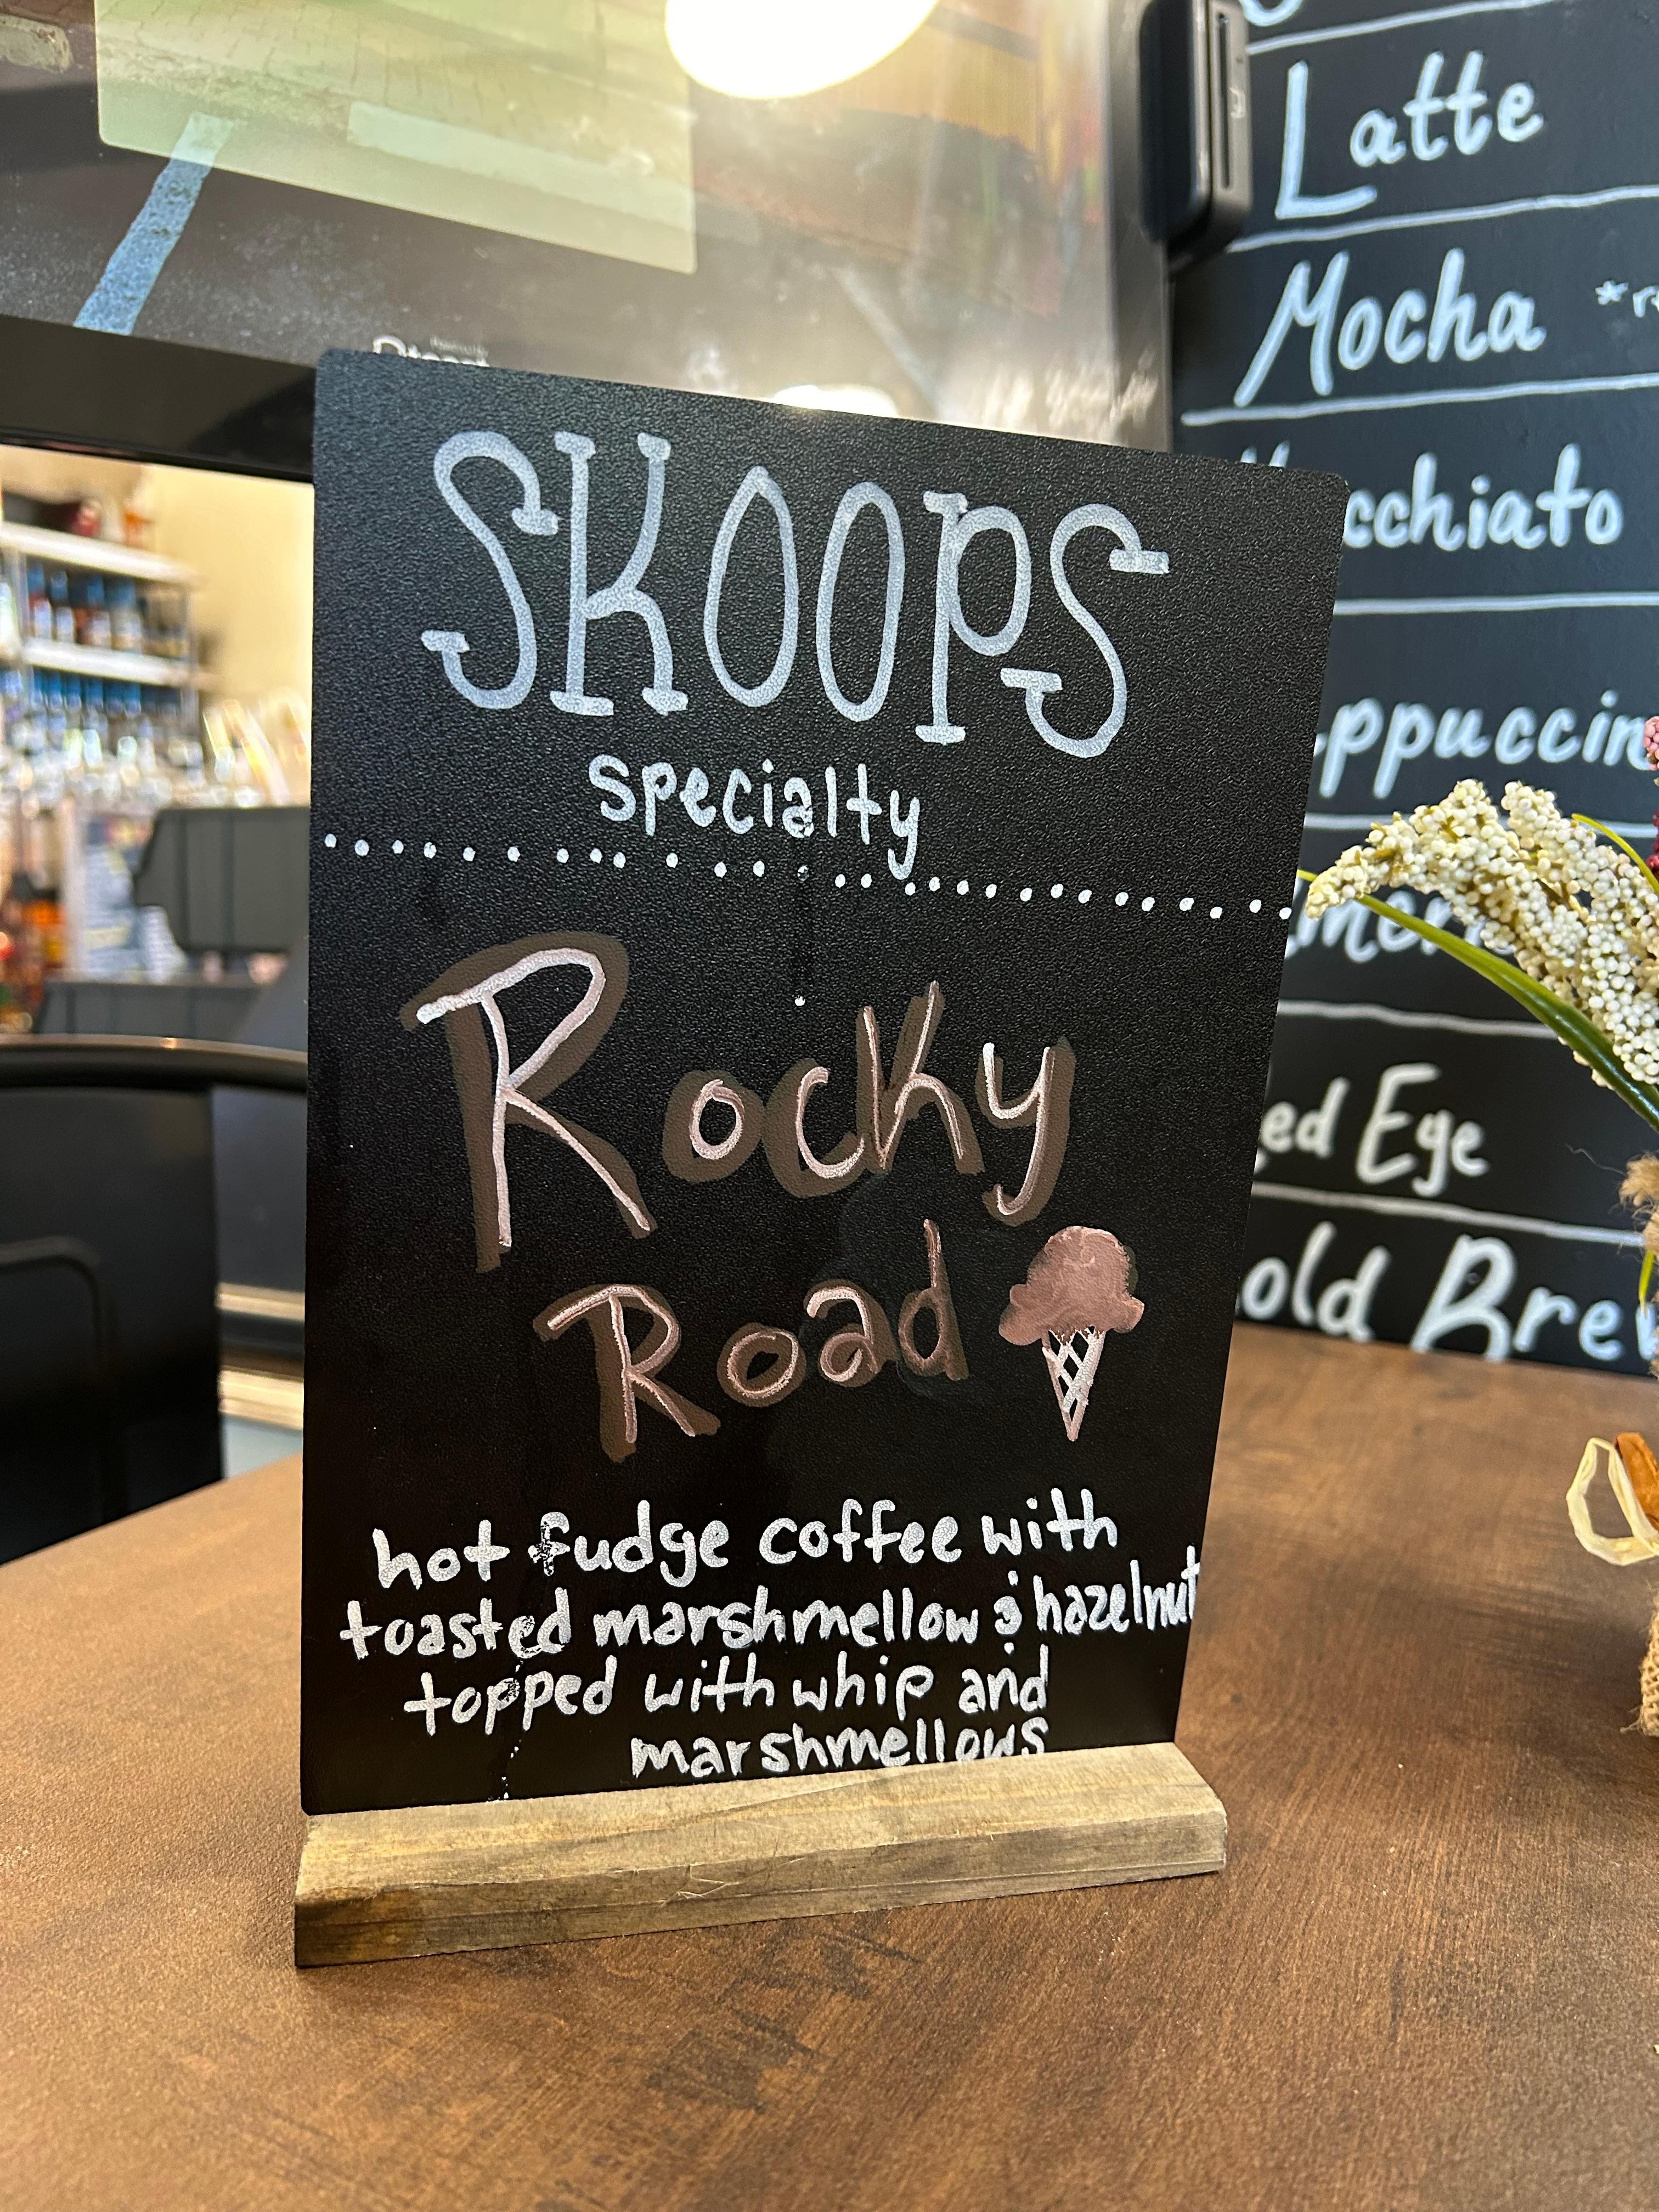 Iced Skoops Coffee Special of the Day